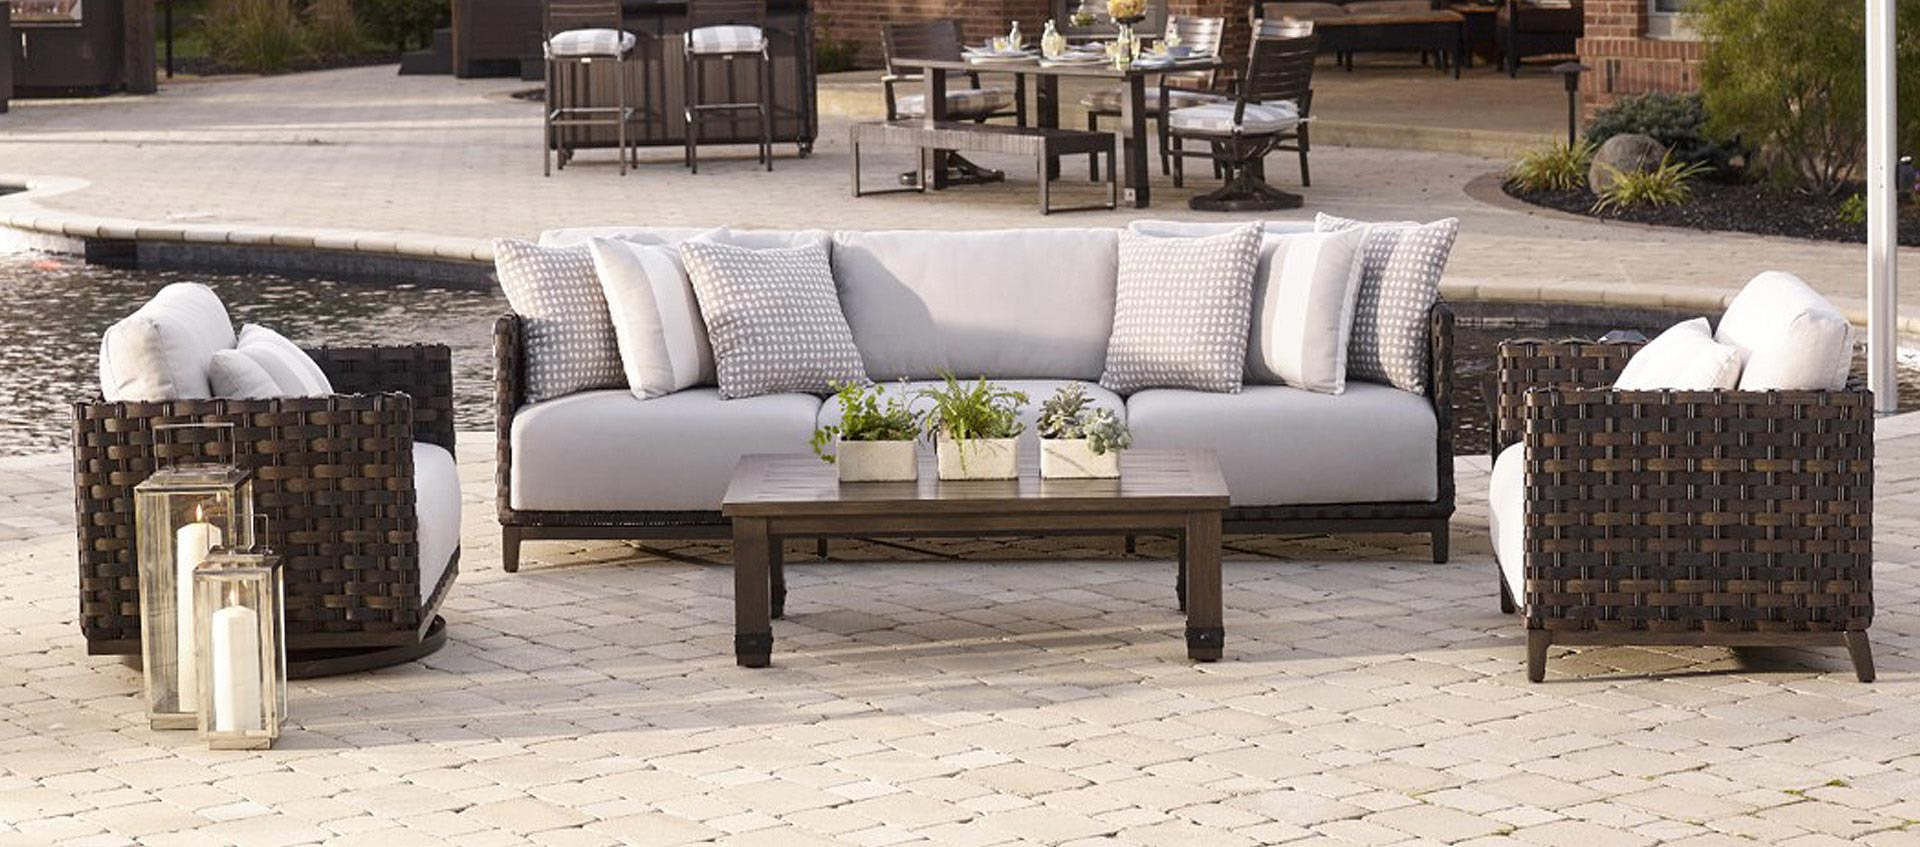 All American Outdoor Living Patio Furniture pertaining to dimensions 1920 X 847